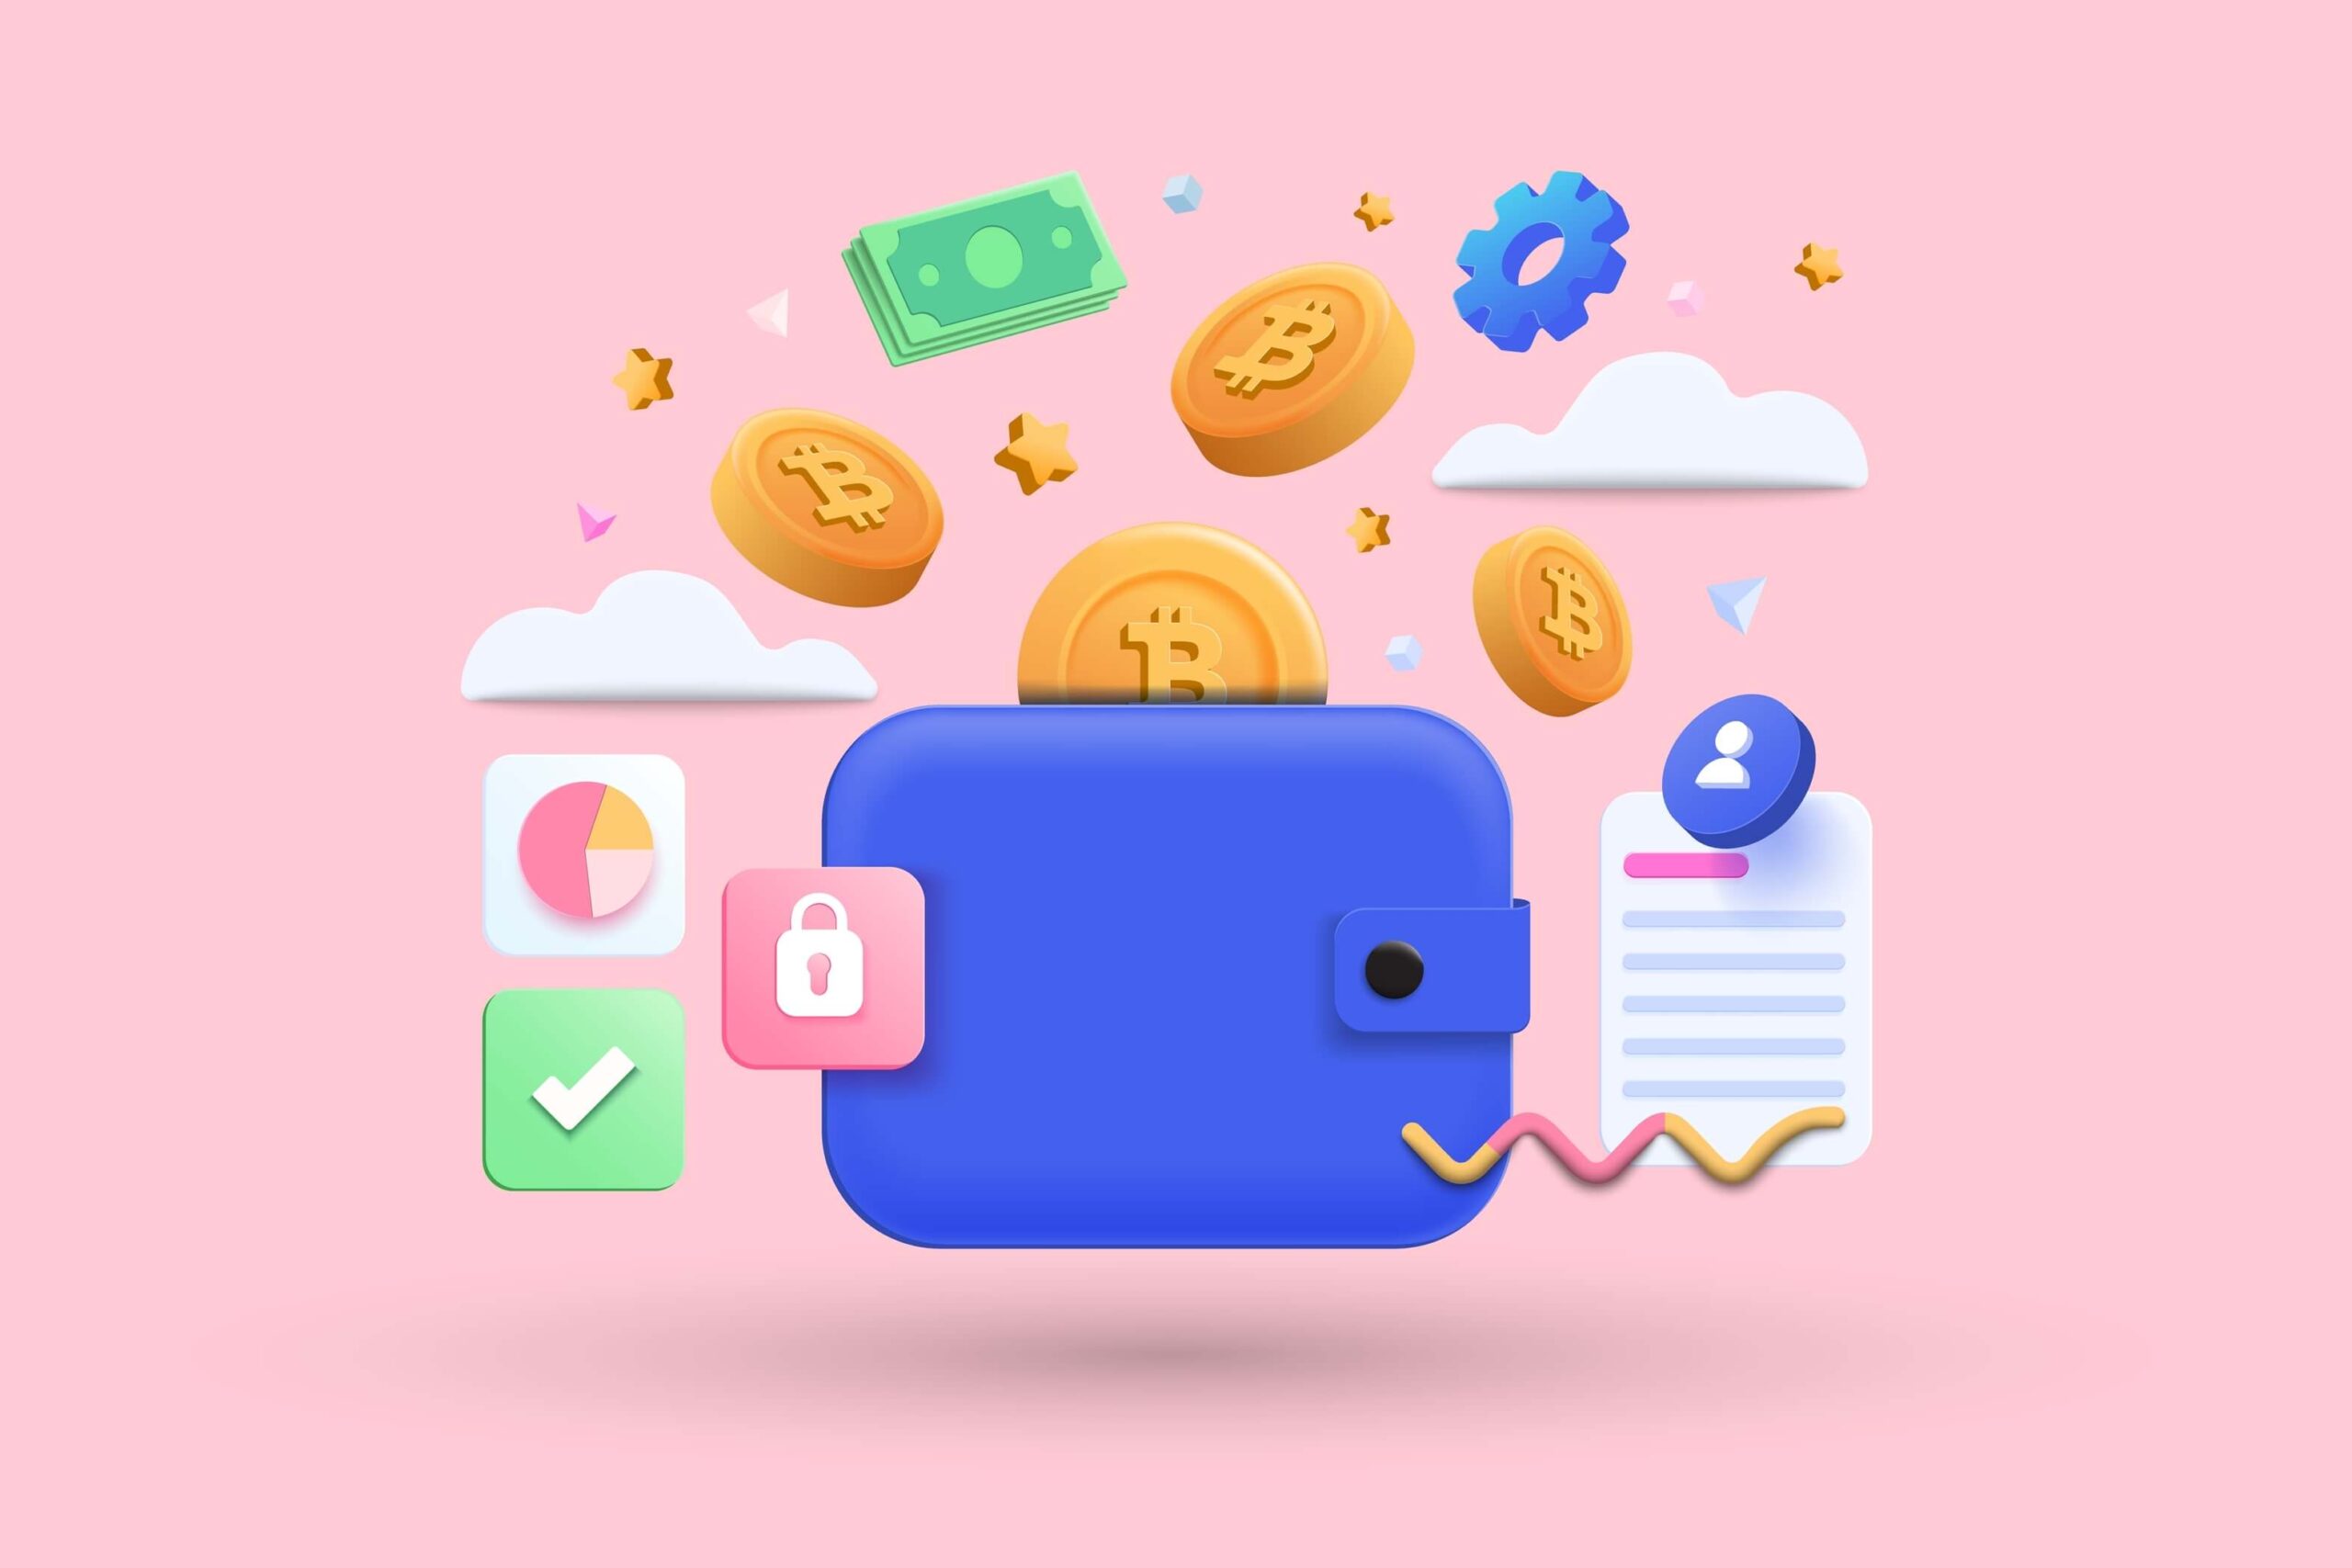 Blue crypto wallet on pink background.